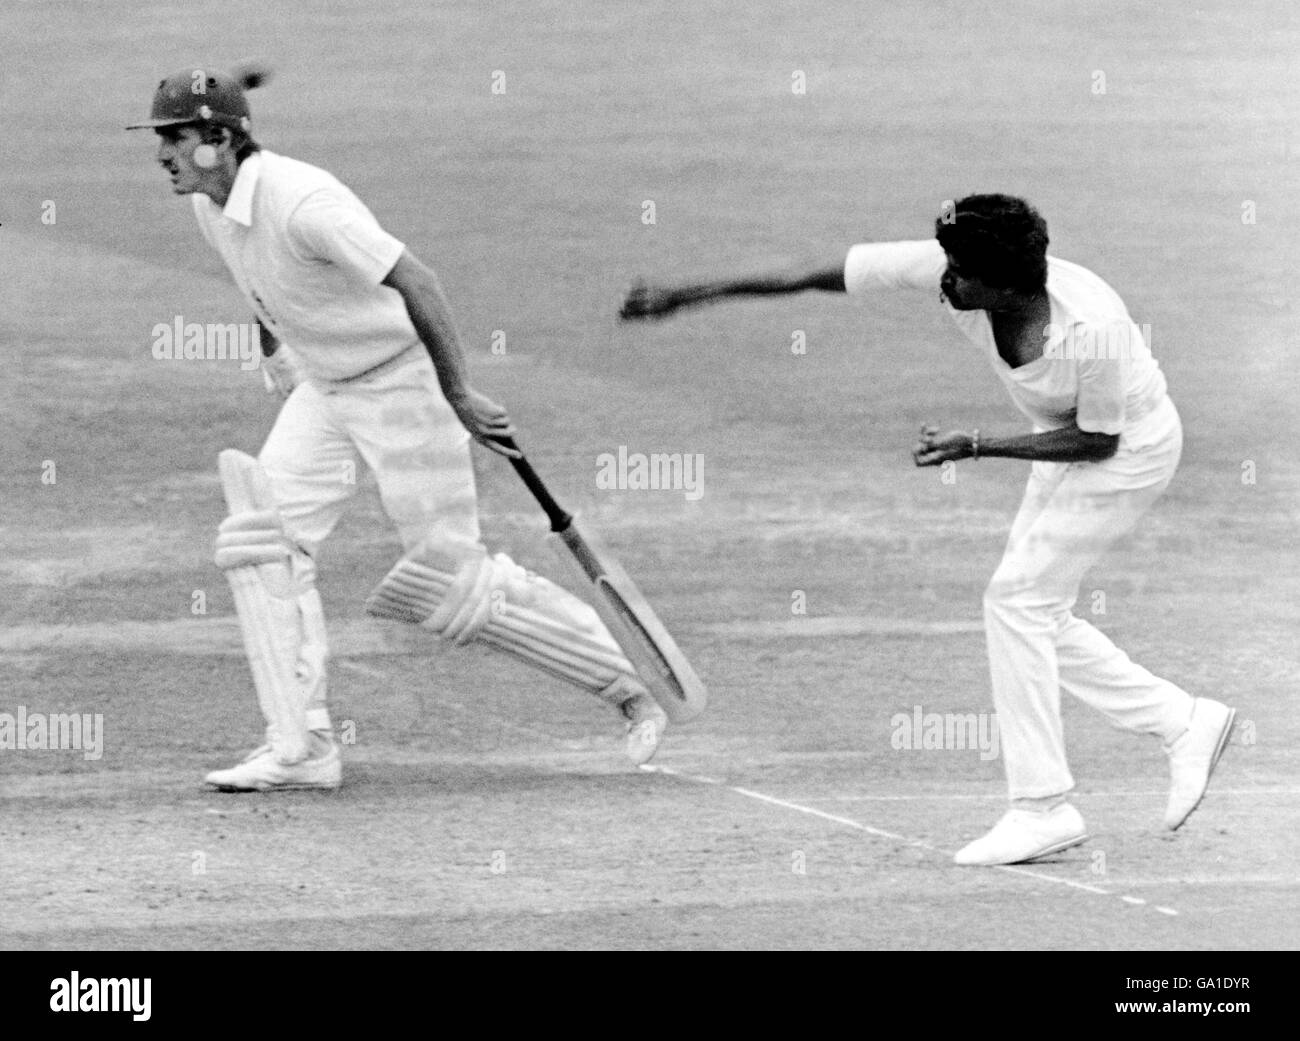 India's Kapil Dev (r) bowling during England's first innings, in which he took five wickets Stock Photo